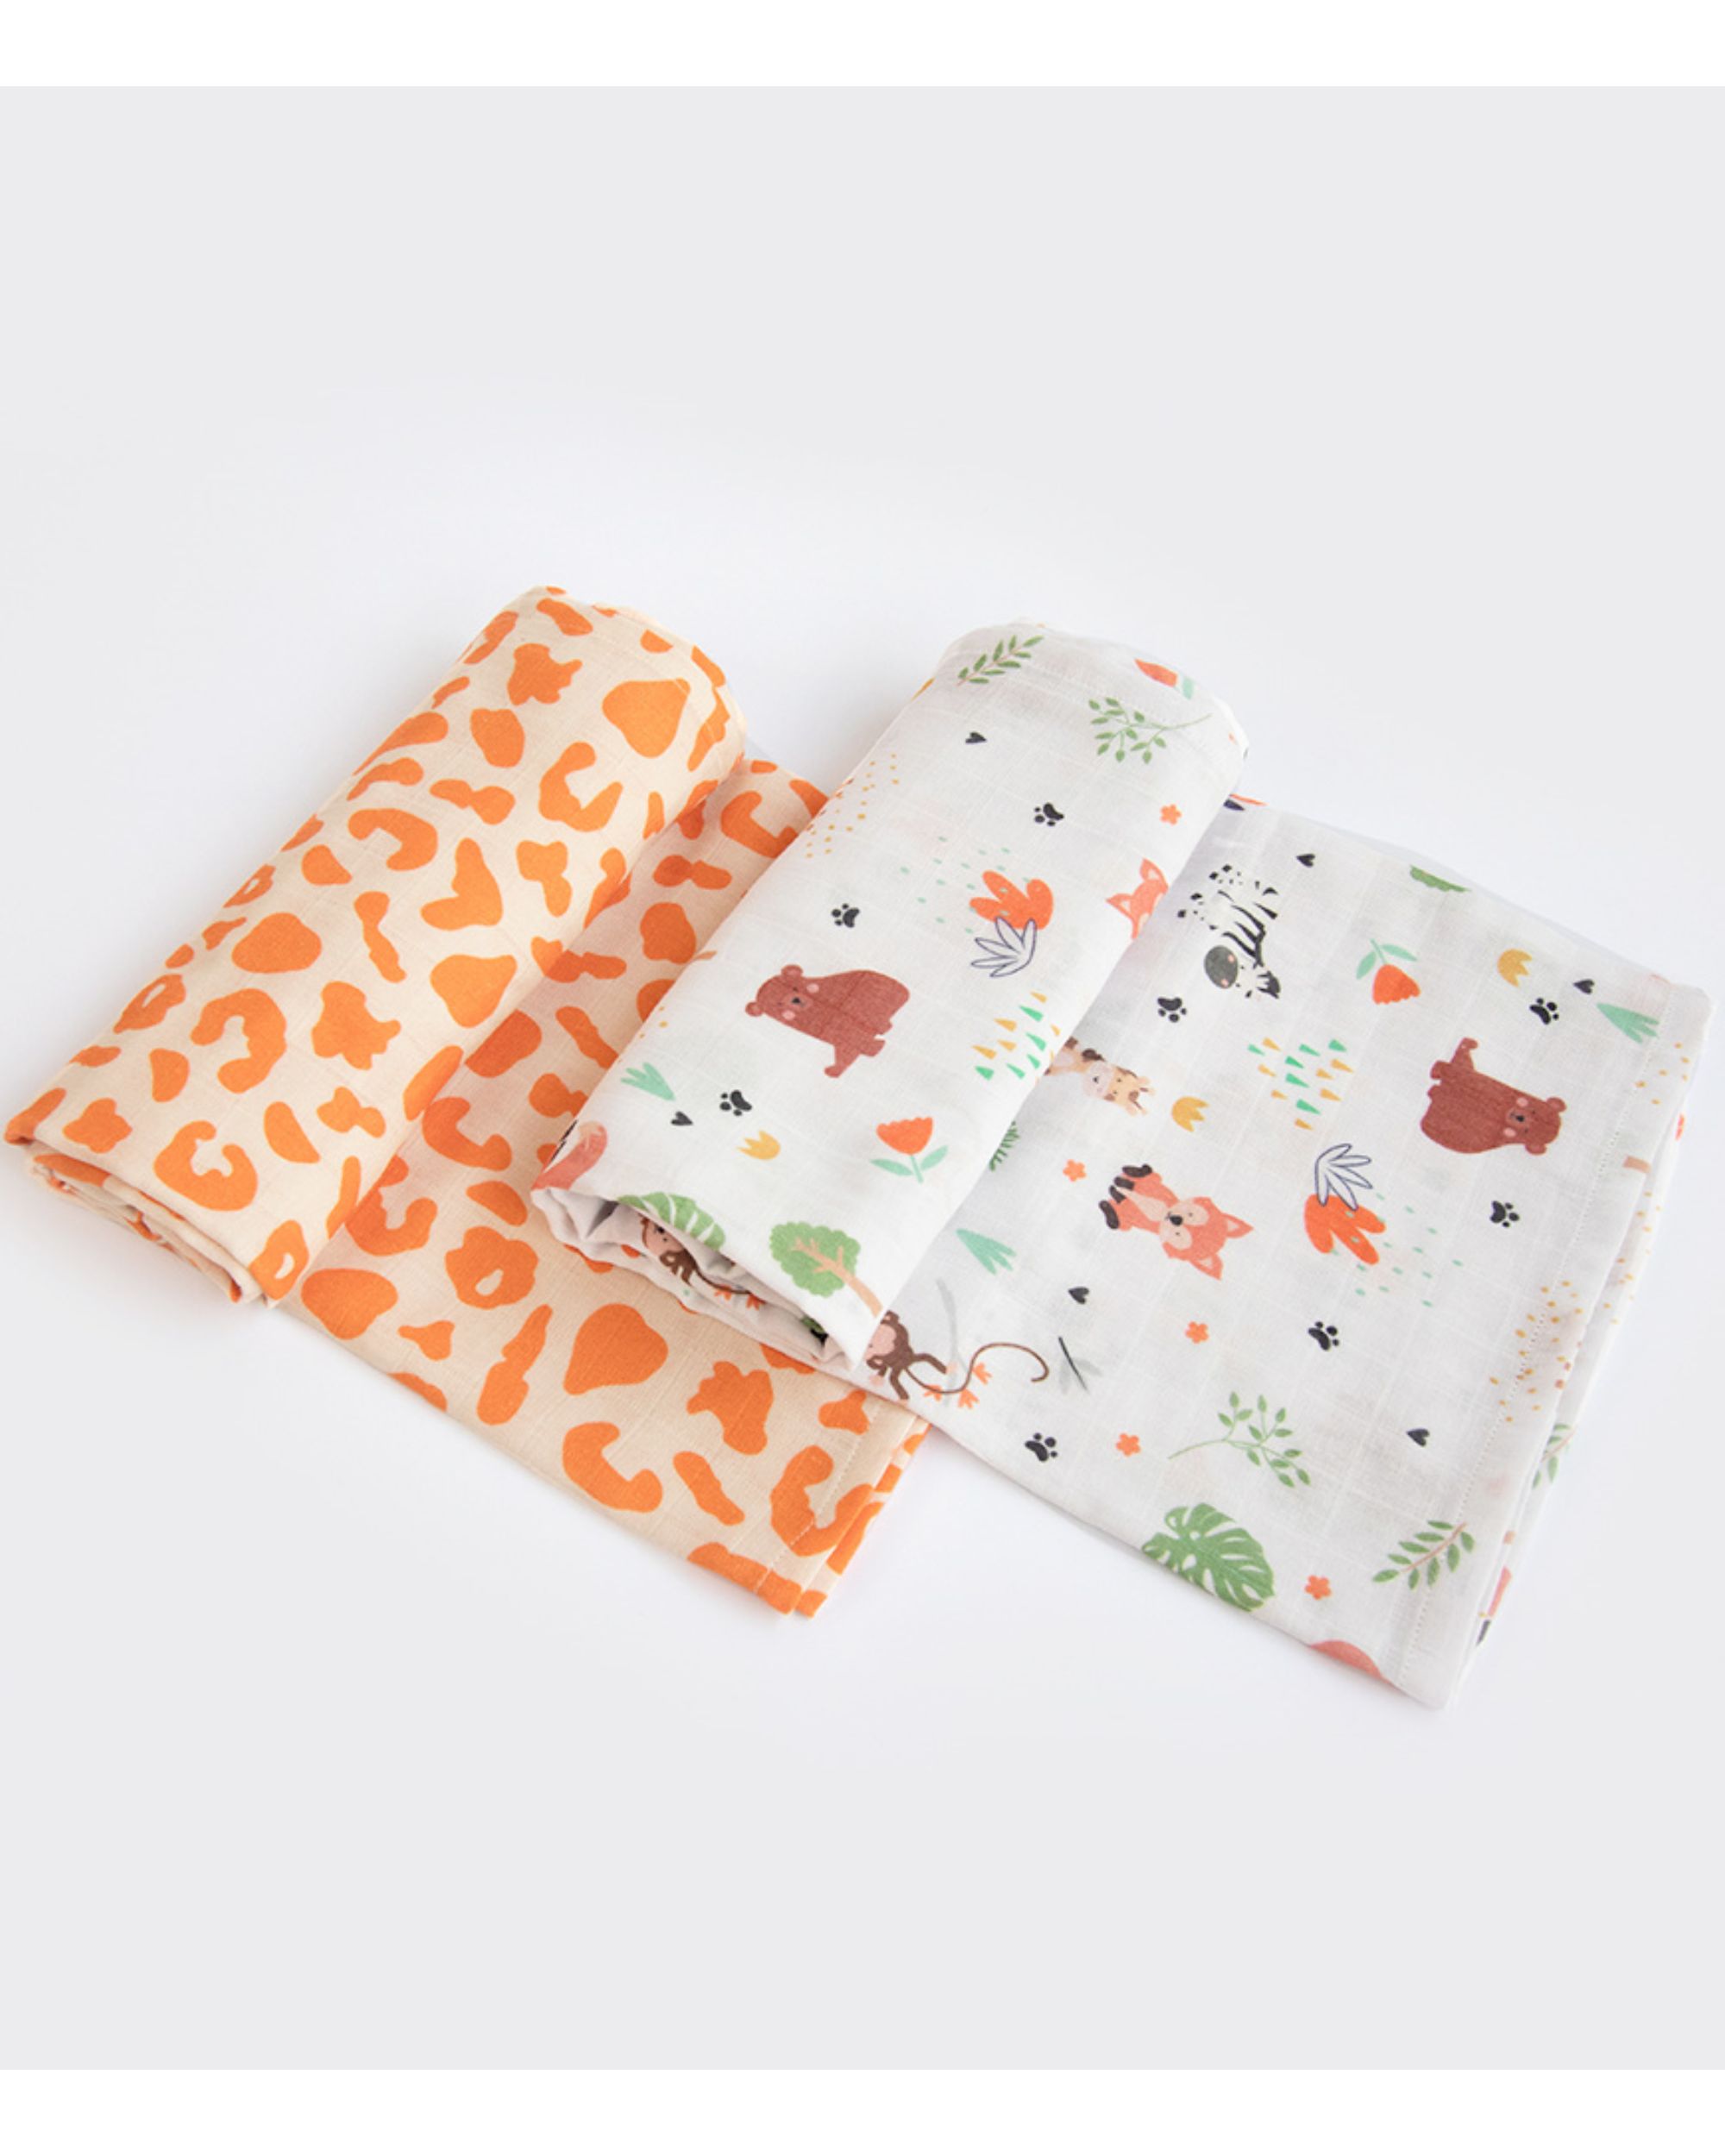 Jungle themed printed swaddle set - set of two